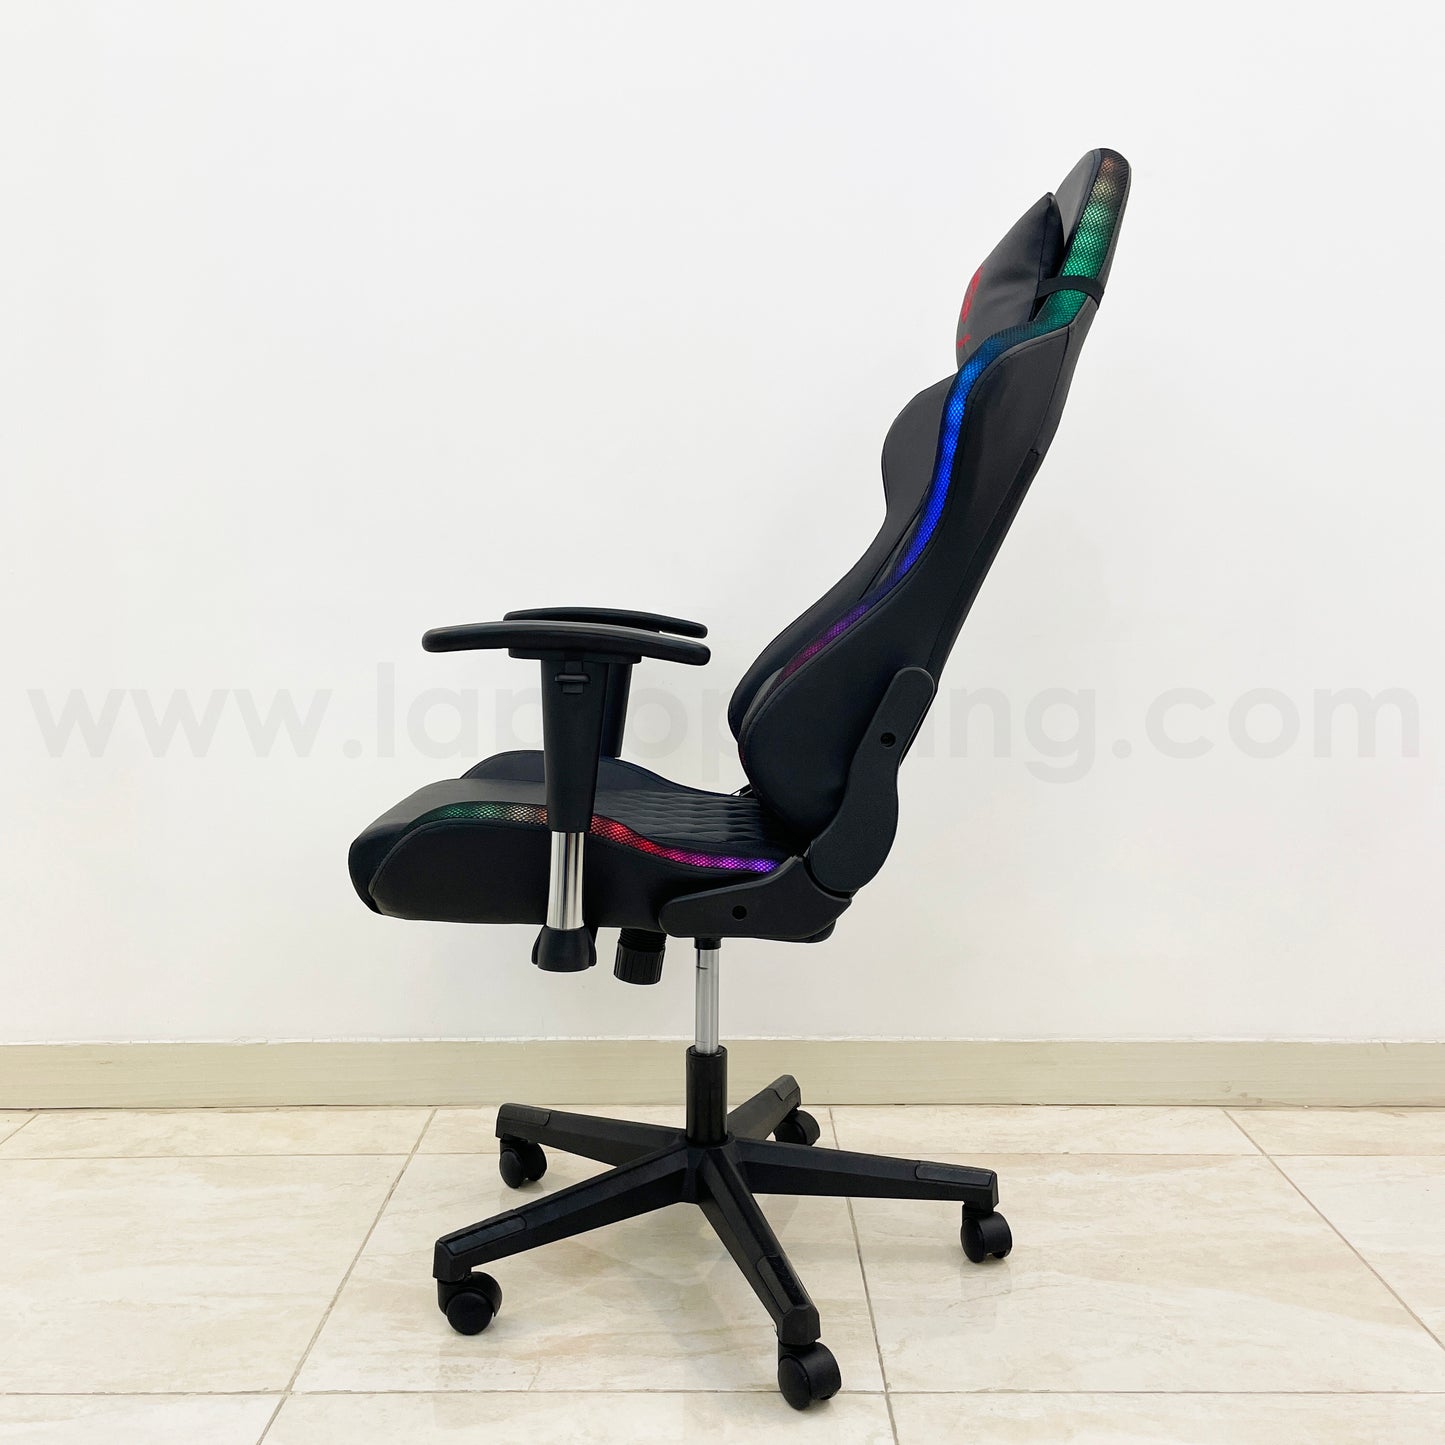 Dragon War GM-203L Rgb With Remote | High Quality Gaming Chair Offer (Brand New)